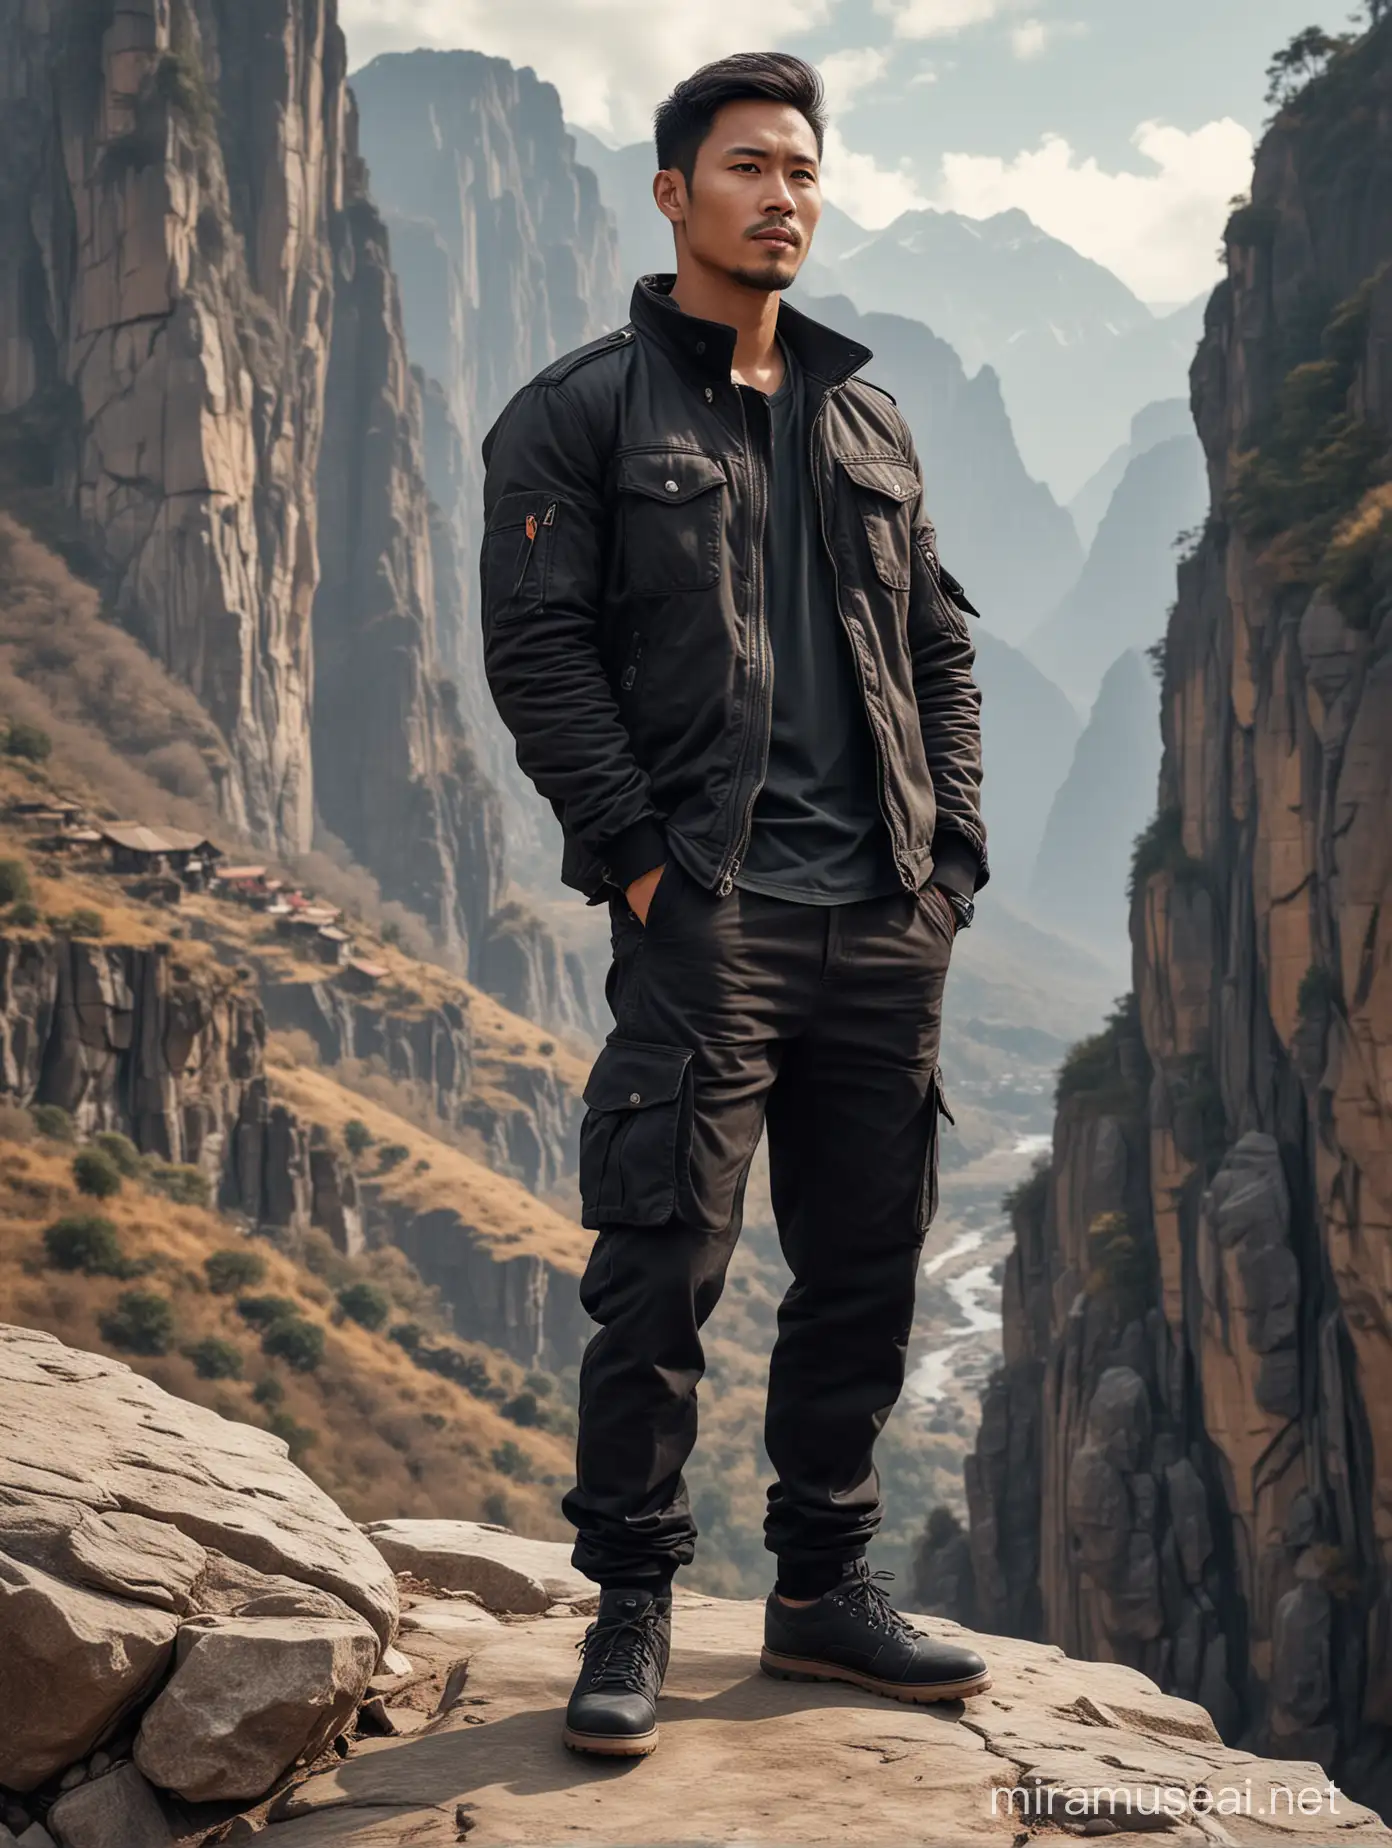 A handsome Indonesian-looking man aged 30 years, short hair and a thin beard, he have fat body, wearing a black jacket and brown tactical pants and black shoes, he is standing on a rock. The background image is high cliffs in the mountains.  The image looks very realistic and super detailed